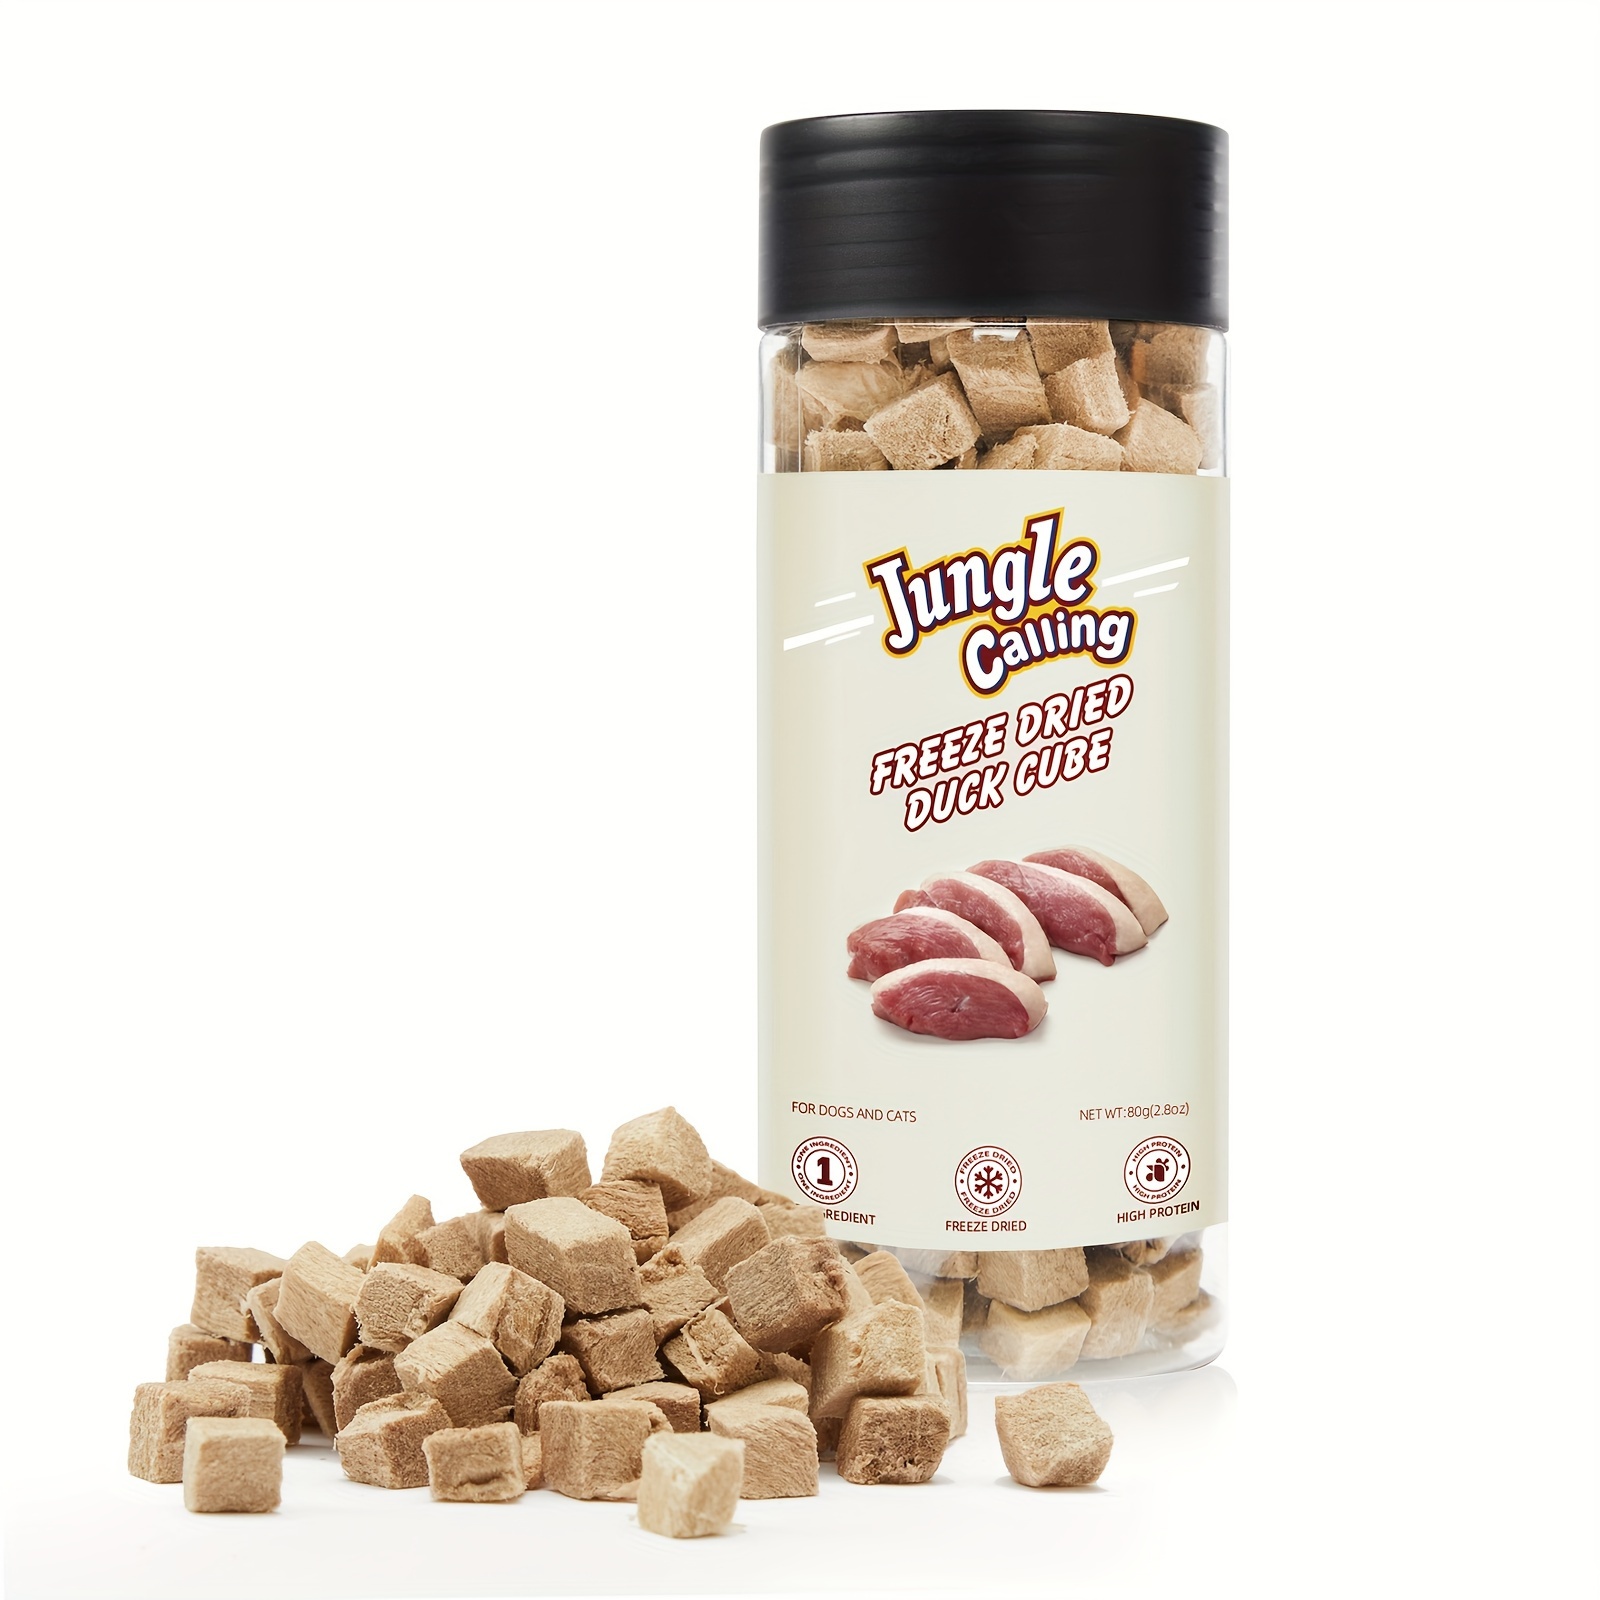 

Jungle Calling Freeze Dried Dog And Cat Treats - High Protein, Low Fat, Made With A Single Ingredient - Perfect For Training And Snacking, 2.8 Oz (duck Cube)